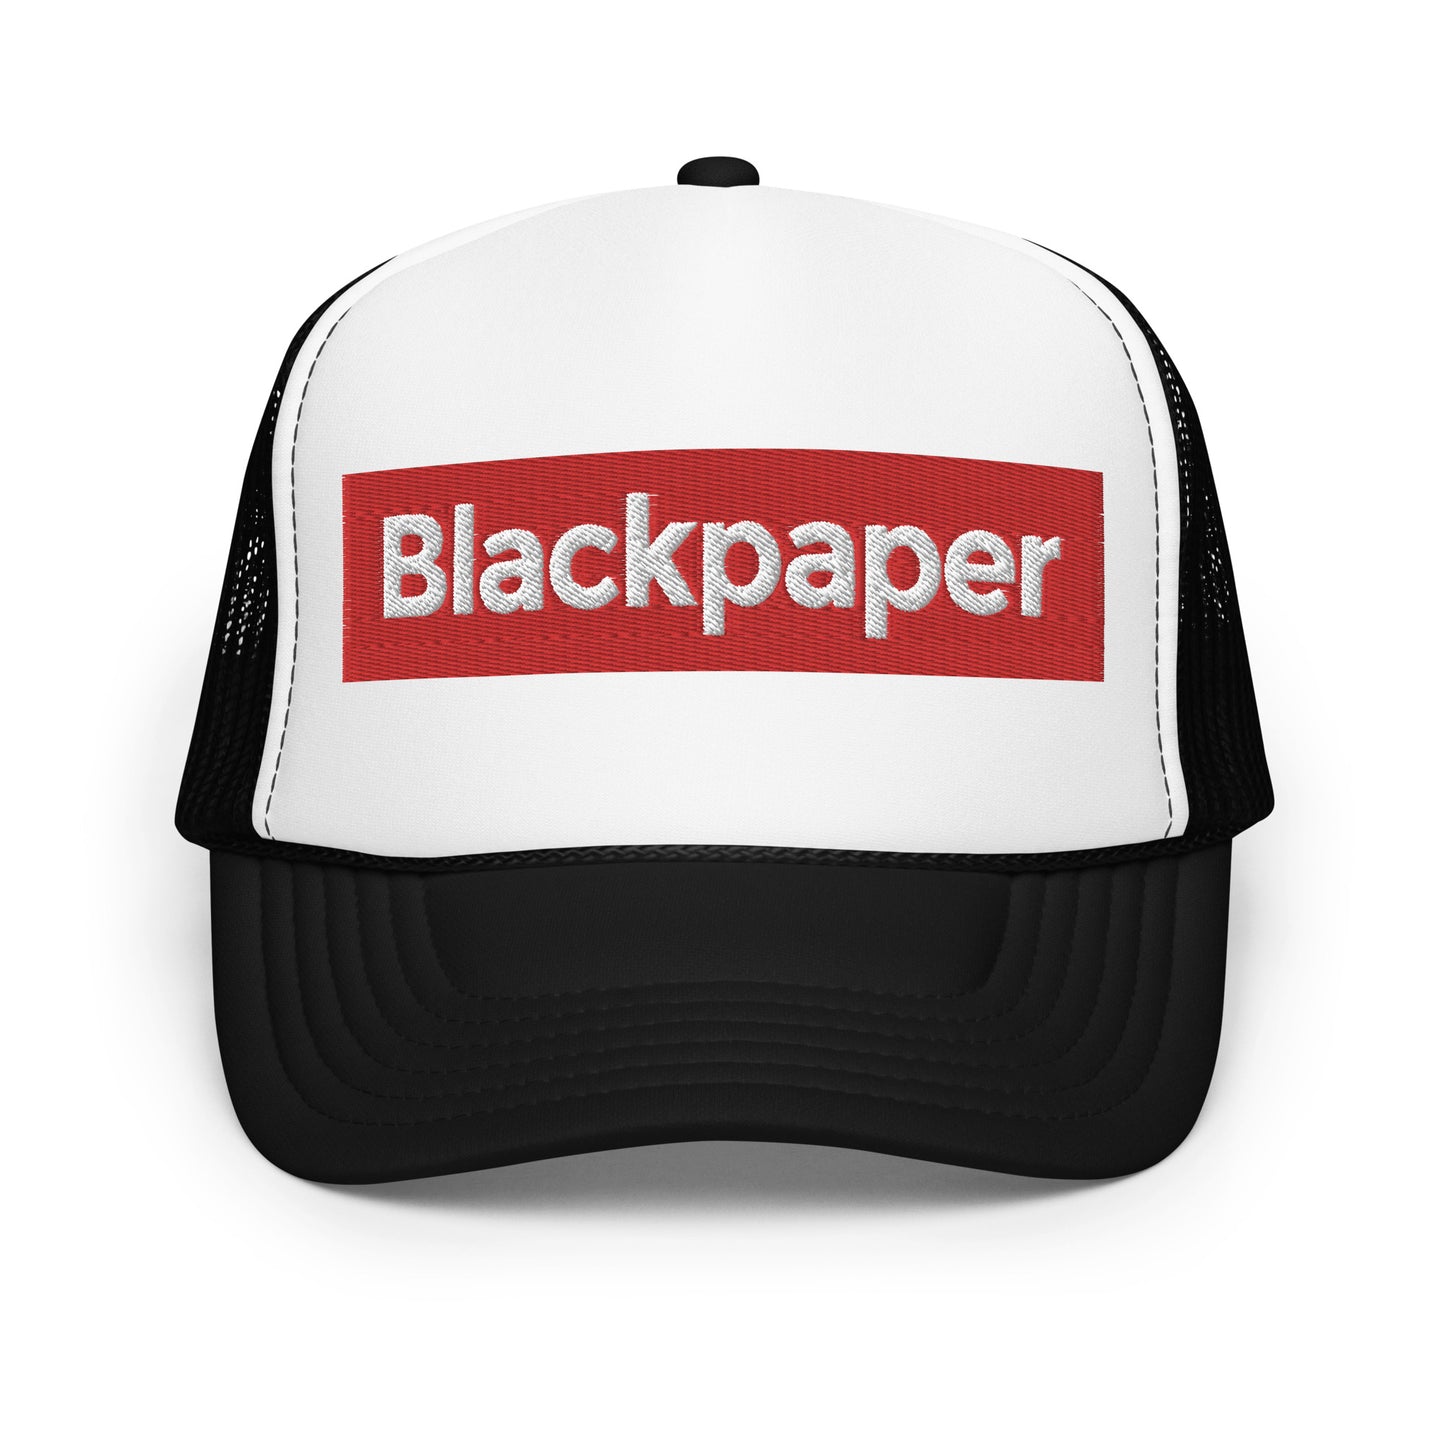 Hats - Trucker Style (various front panel graphics)